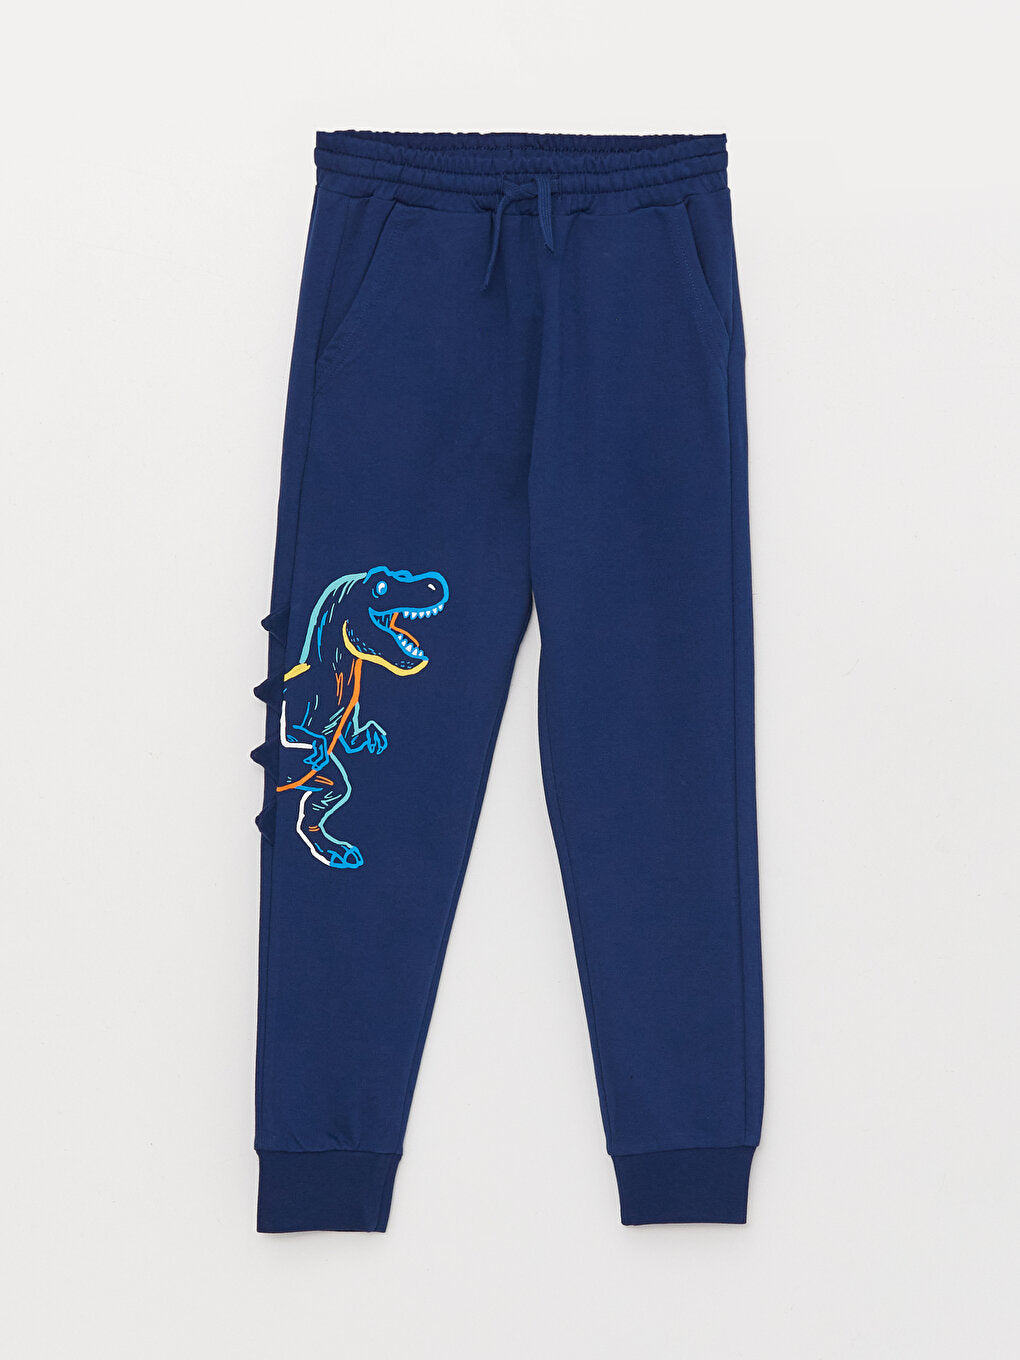 Sweatpants Looking Forward To Gym Class